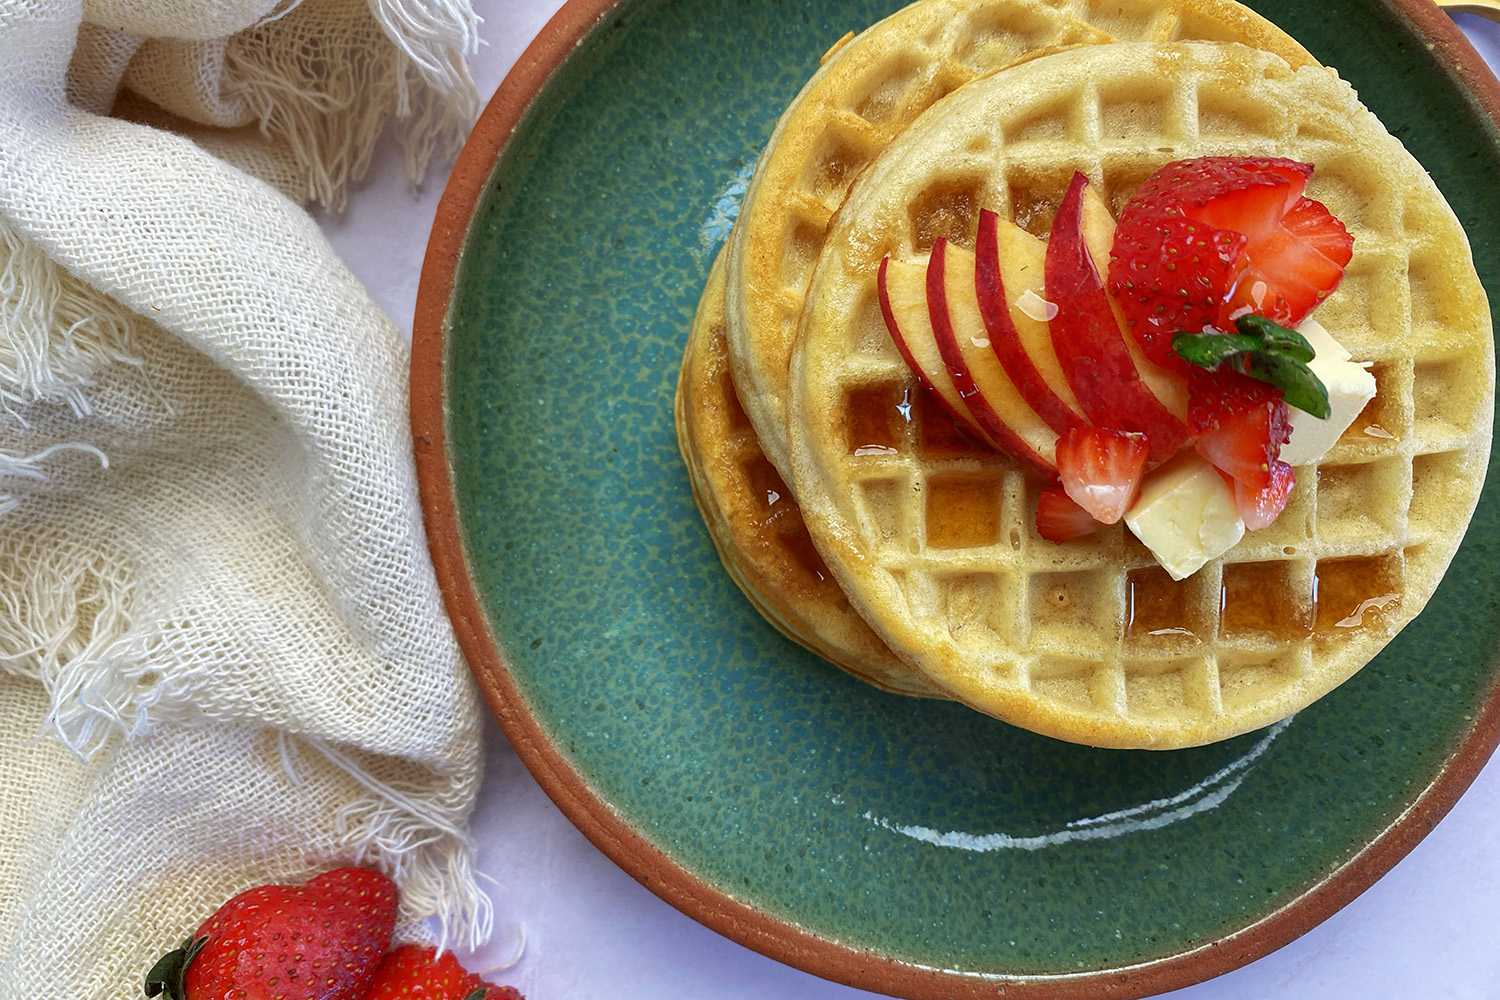 Cook frozen waffles in the air fryer to get a crispy golden waffle. Top with your favorite fresh fruit.